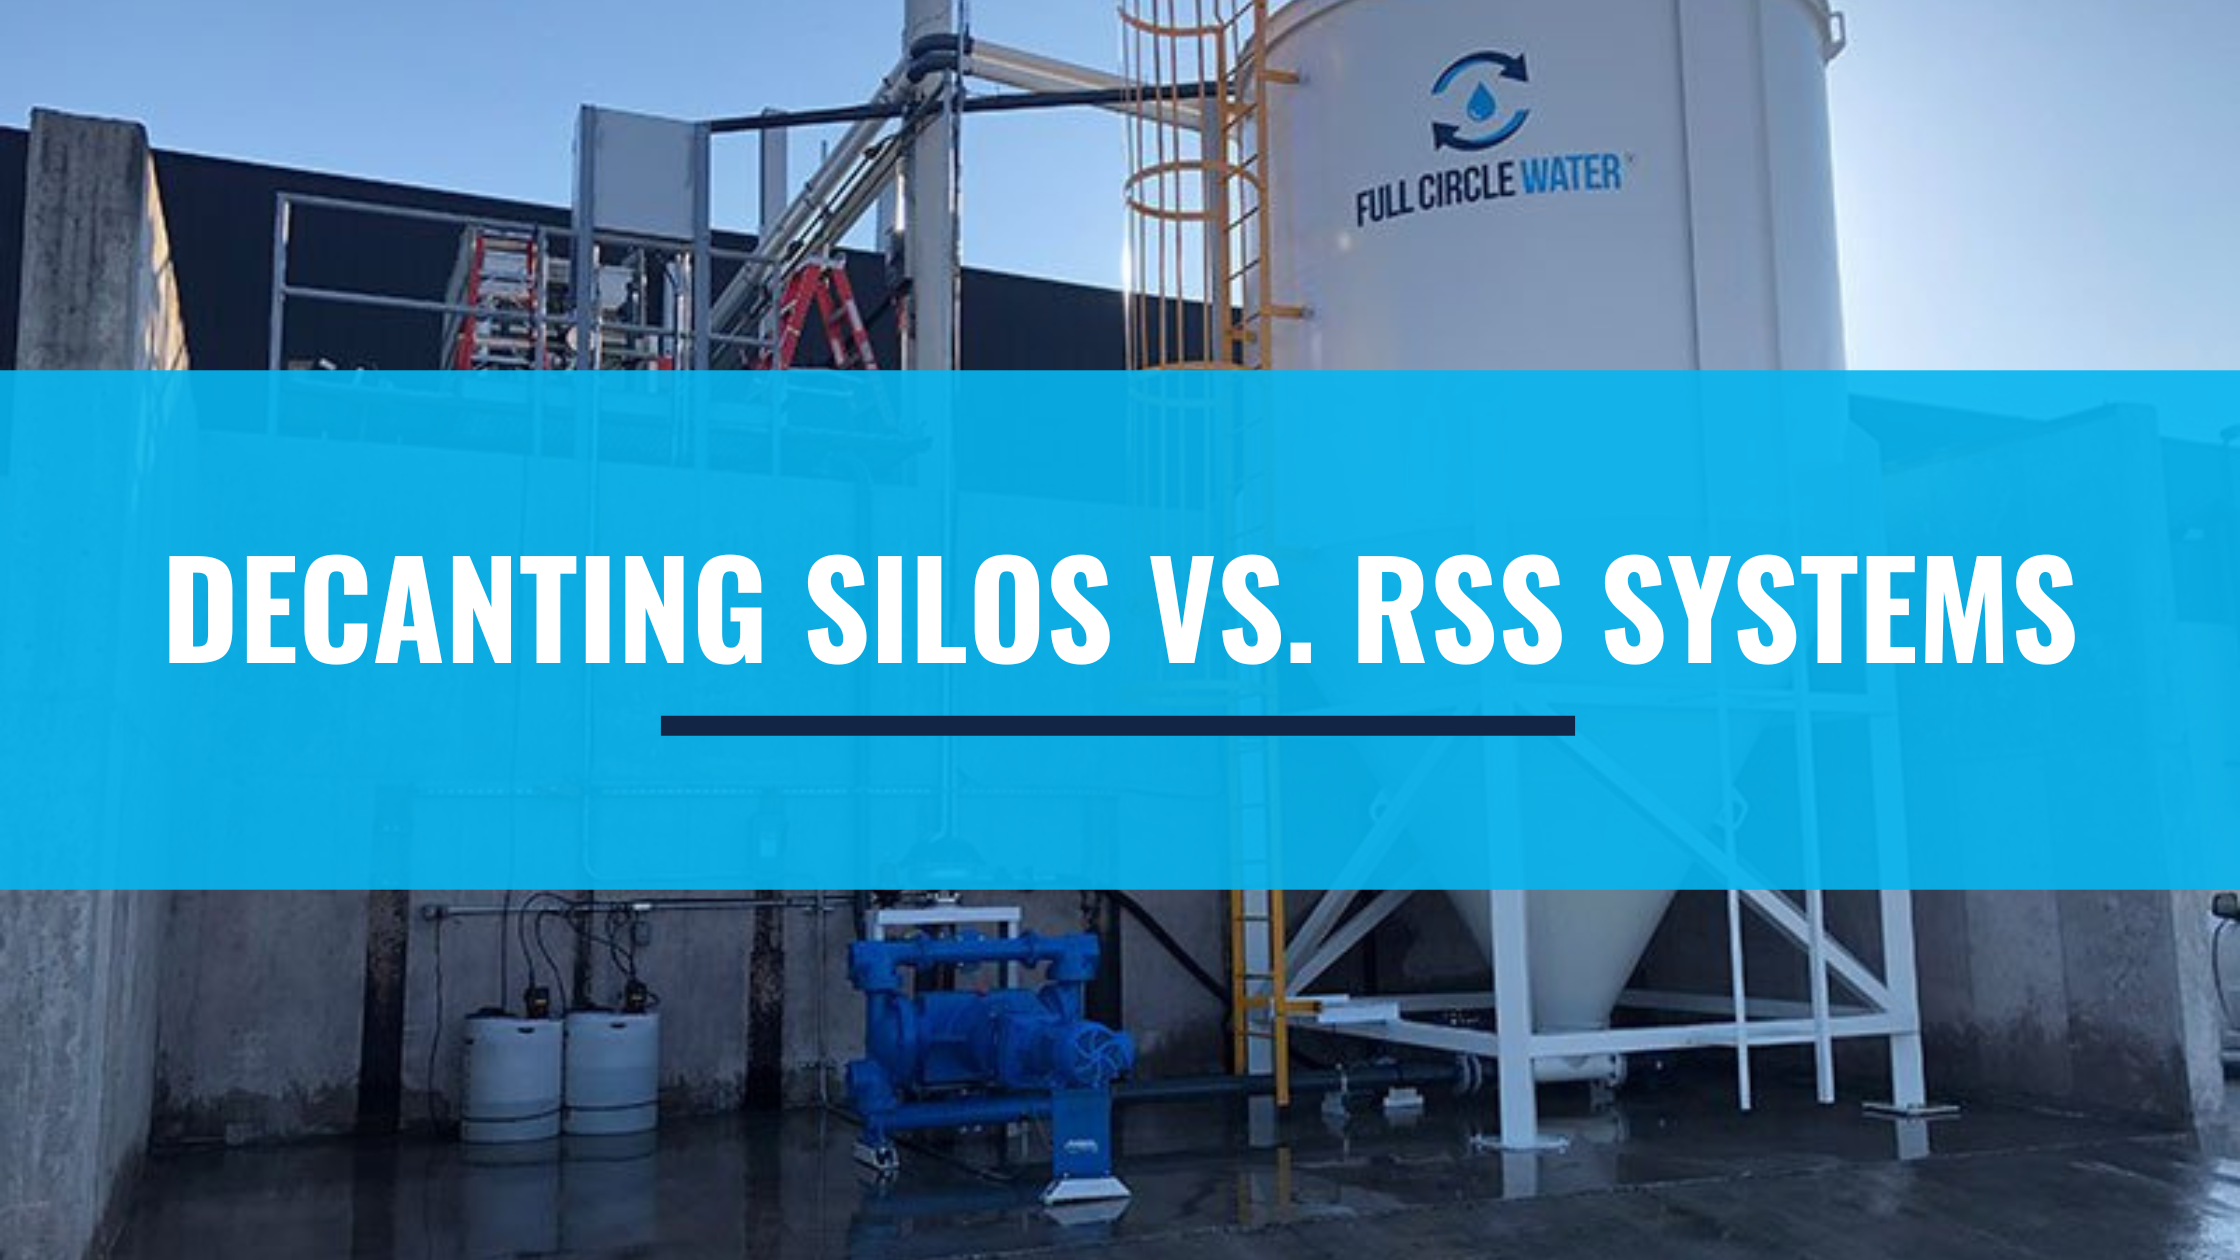 Featured image for “What Are the Differences Between Decanting Silos & Rapid Settlement Systems?”